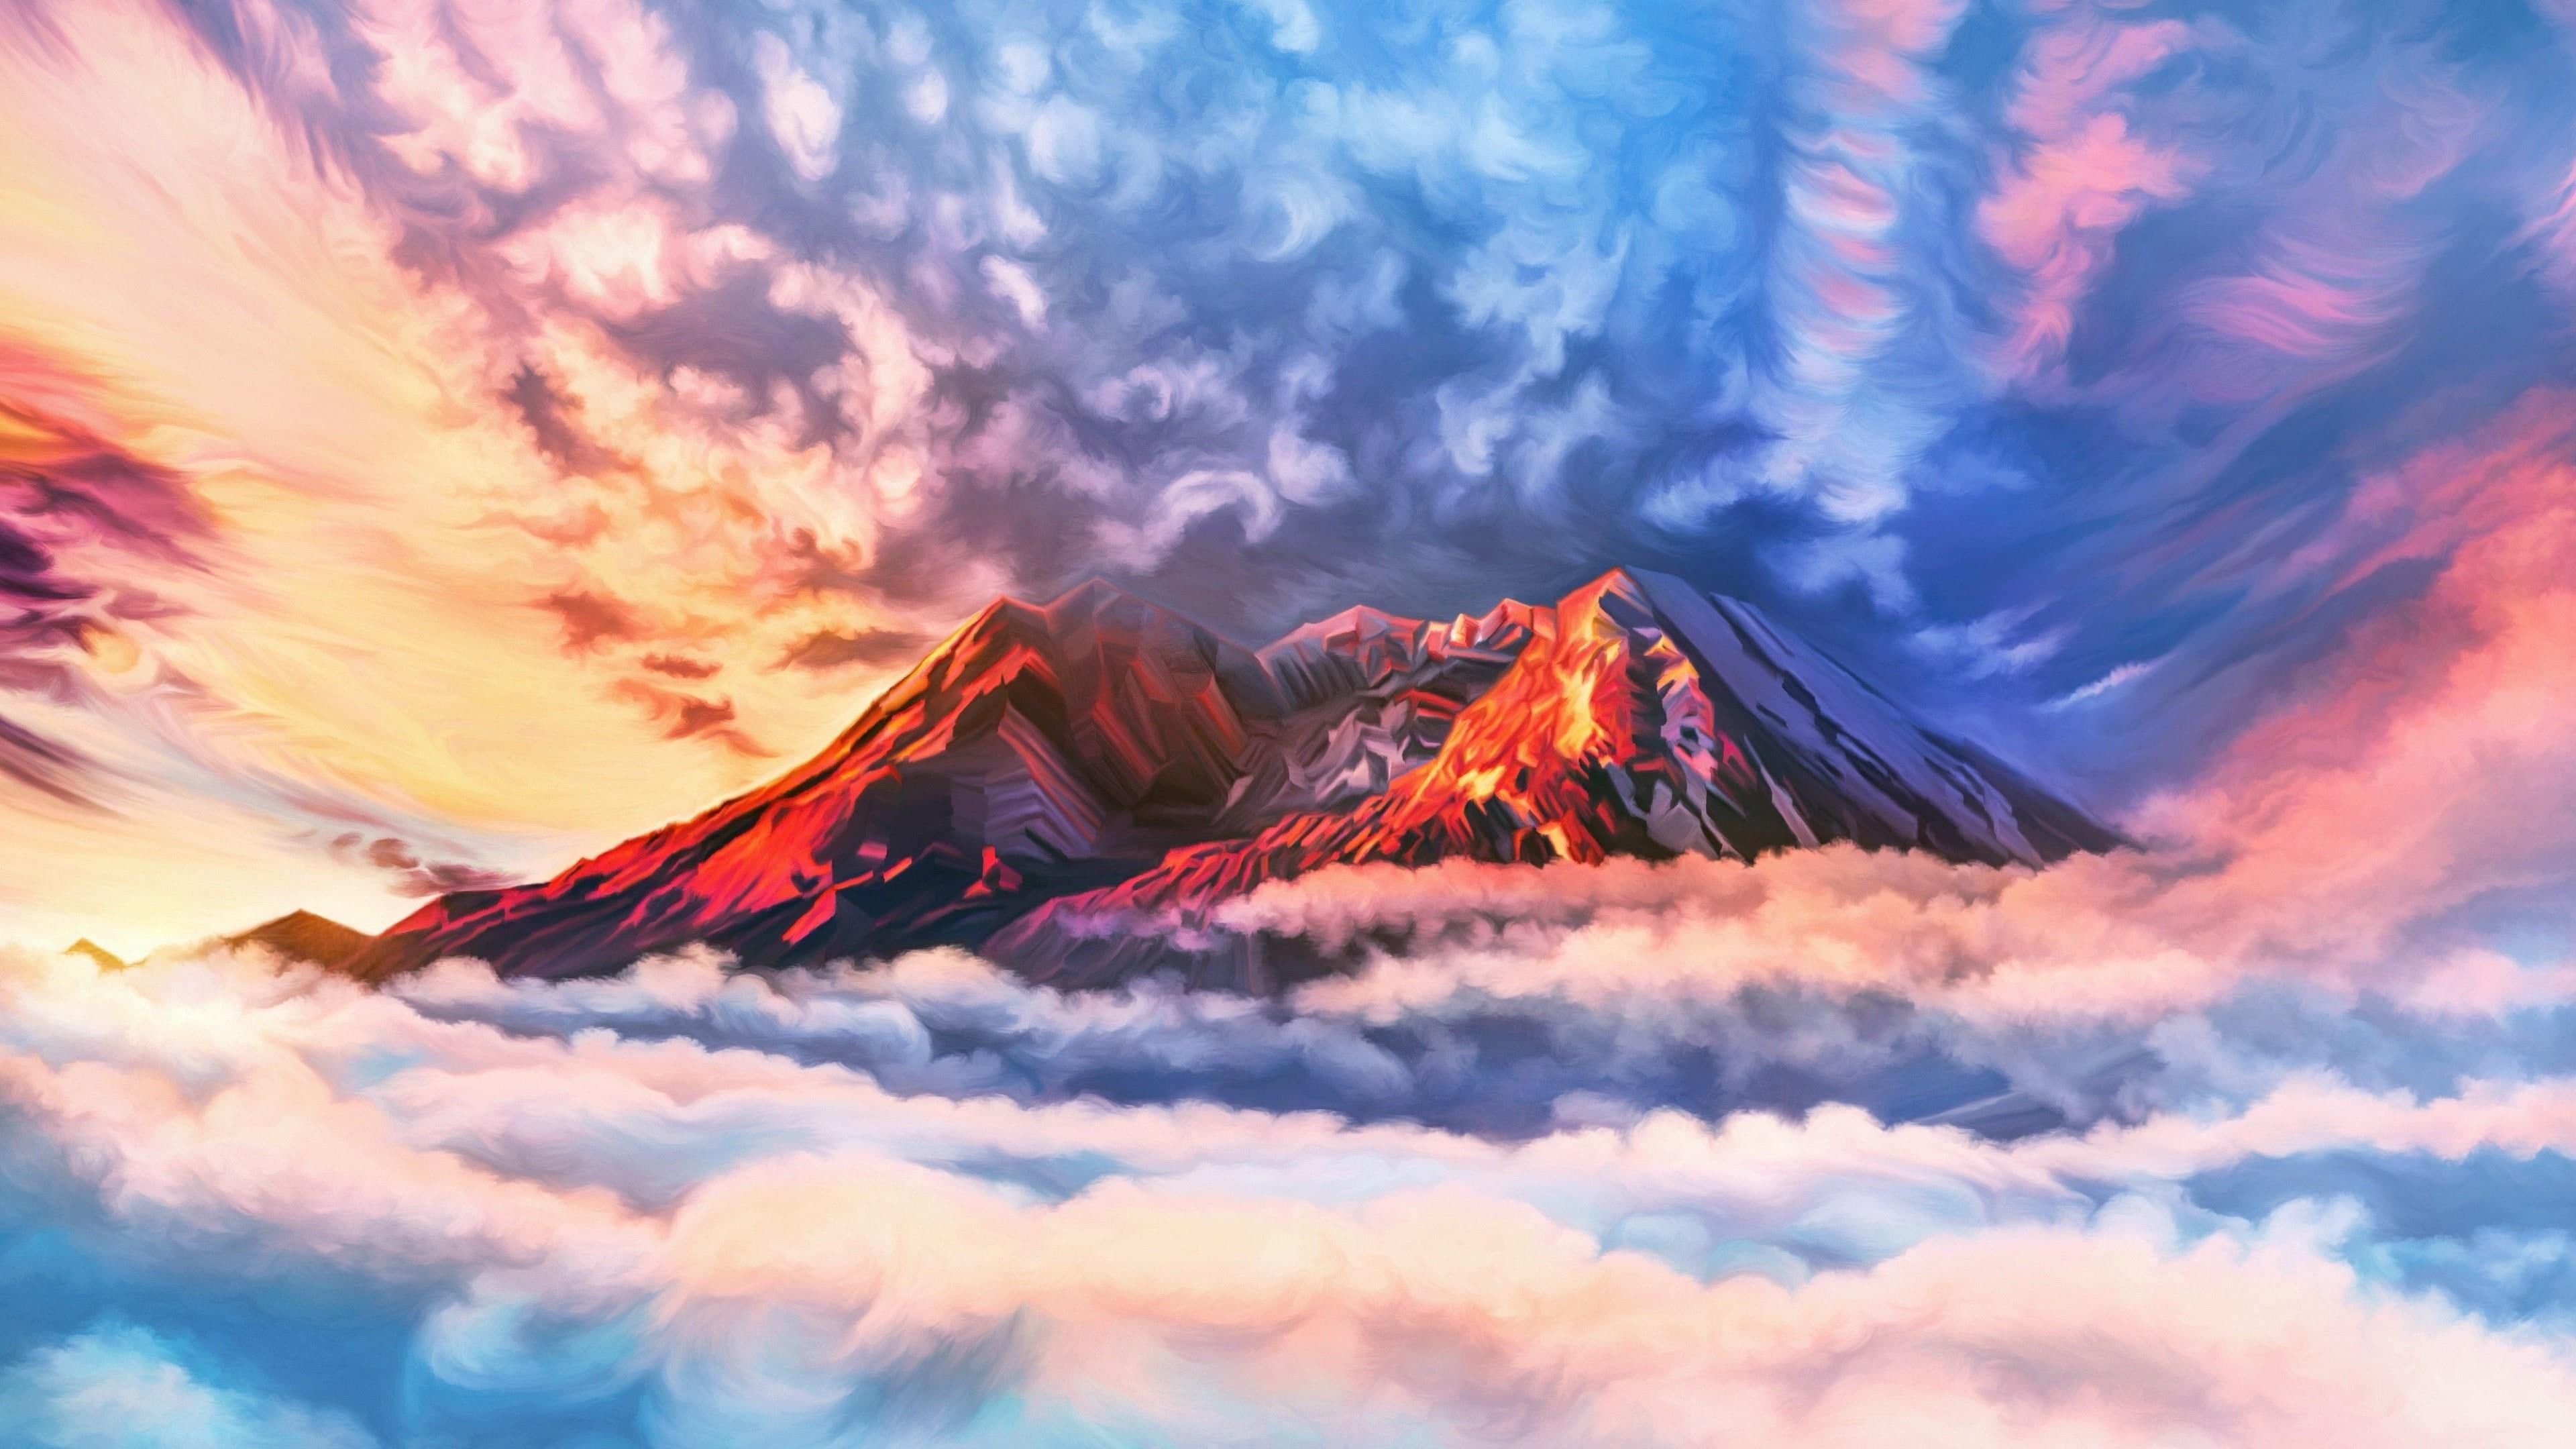 Scenery Of Mountain And Cloud Painting Wallpapers